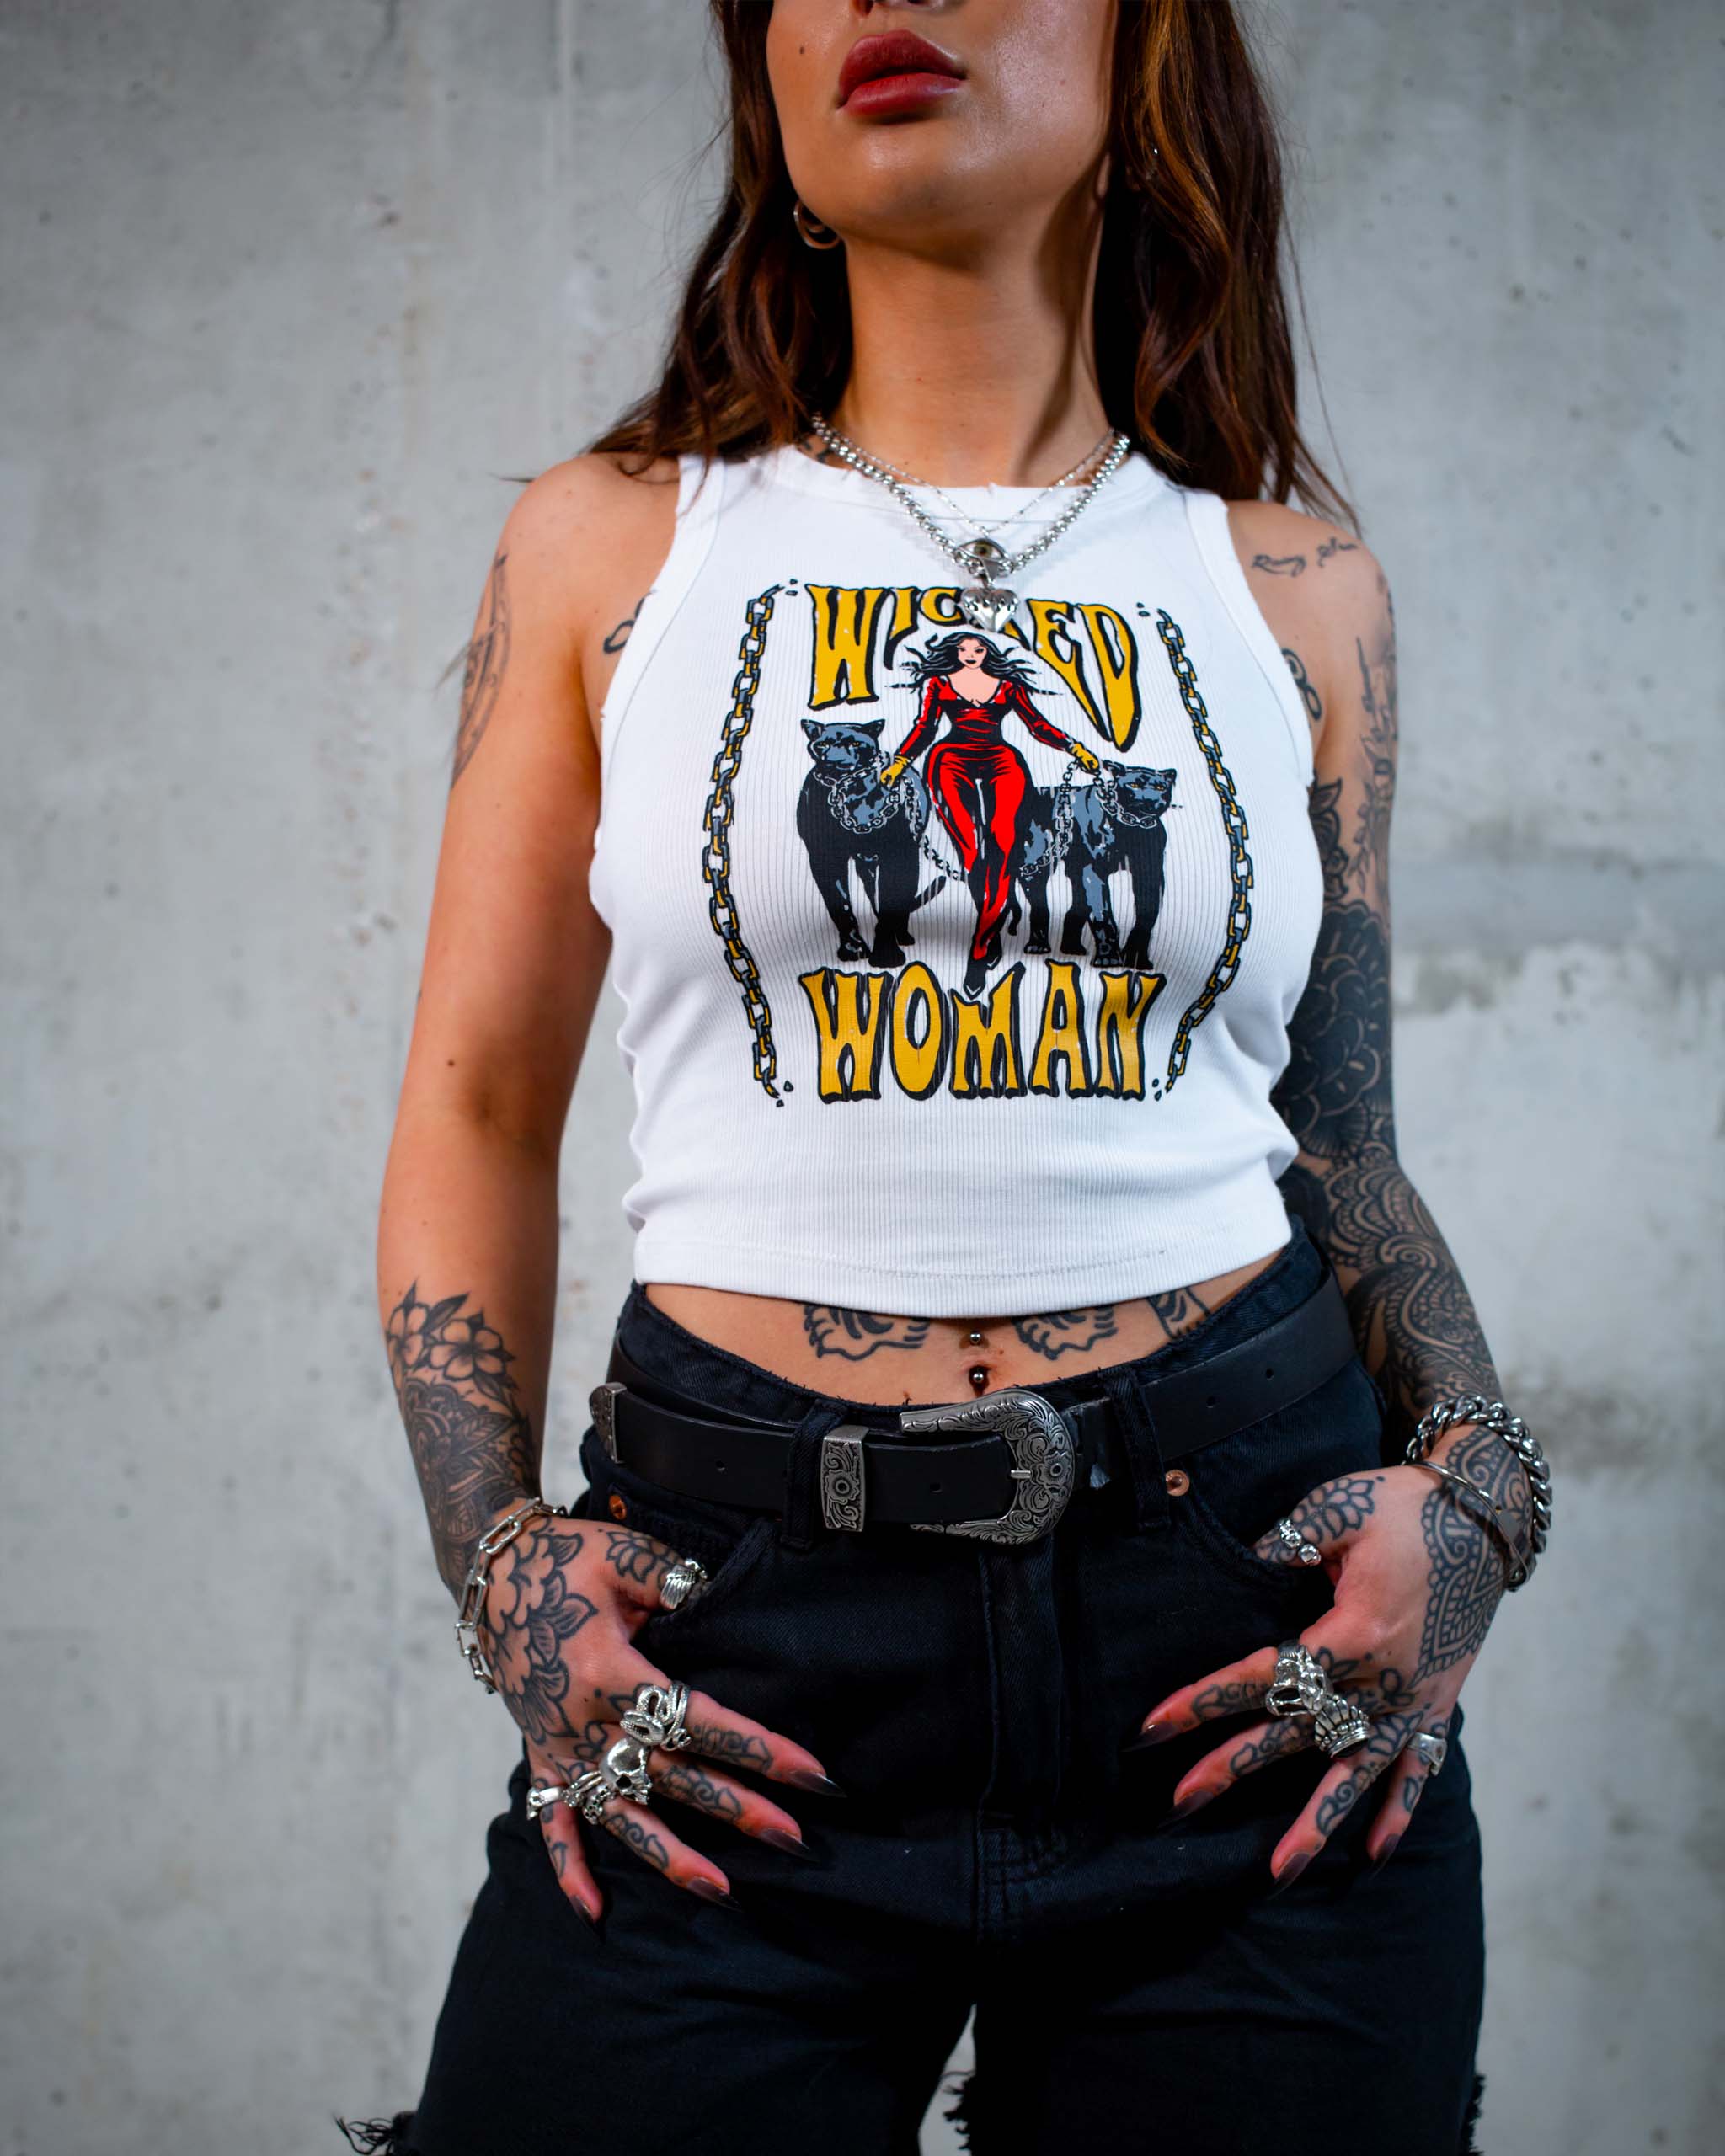 The Wicked Woman tank top by Sleazy Rider, featuring a woman in a catsuit with two panthers on a leash.